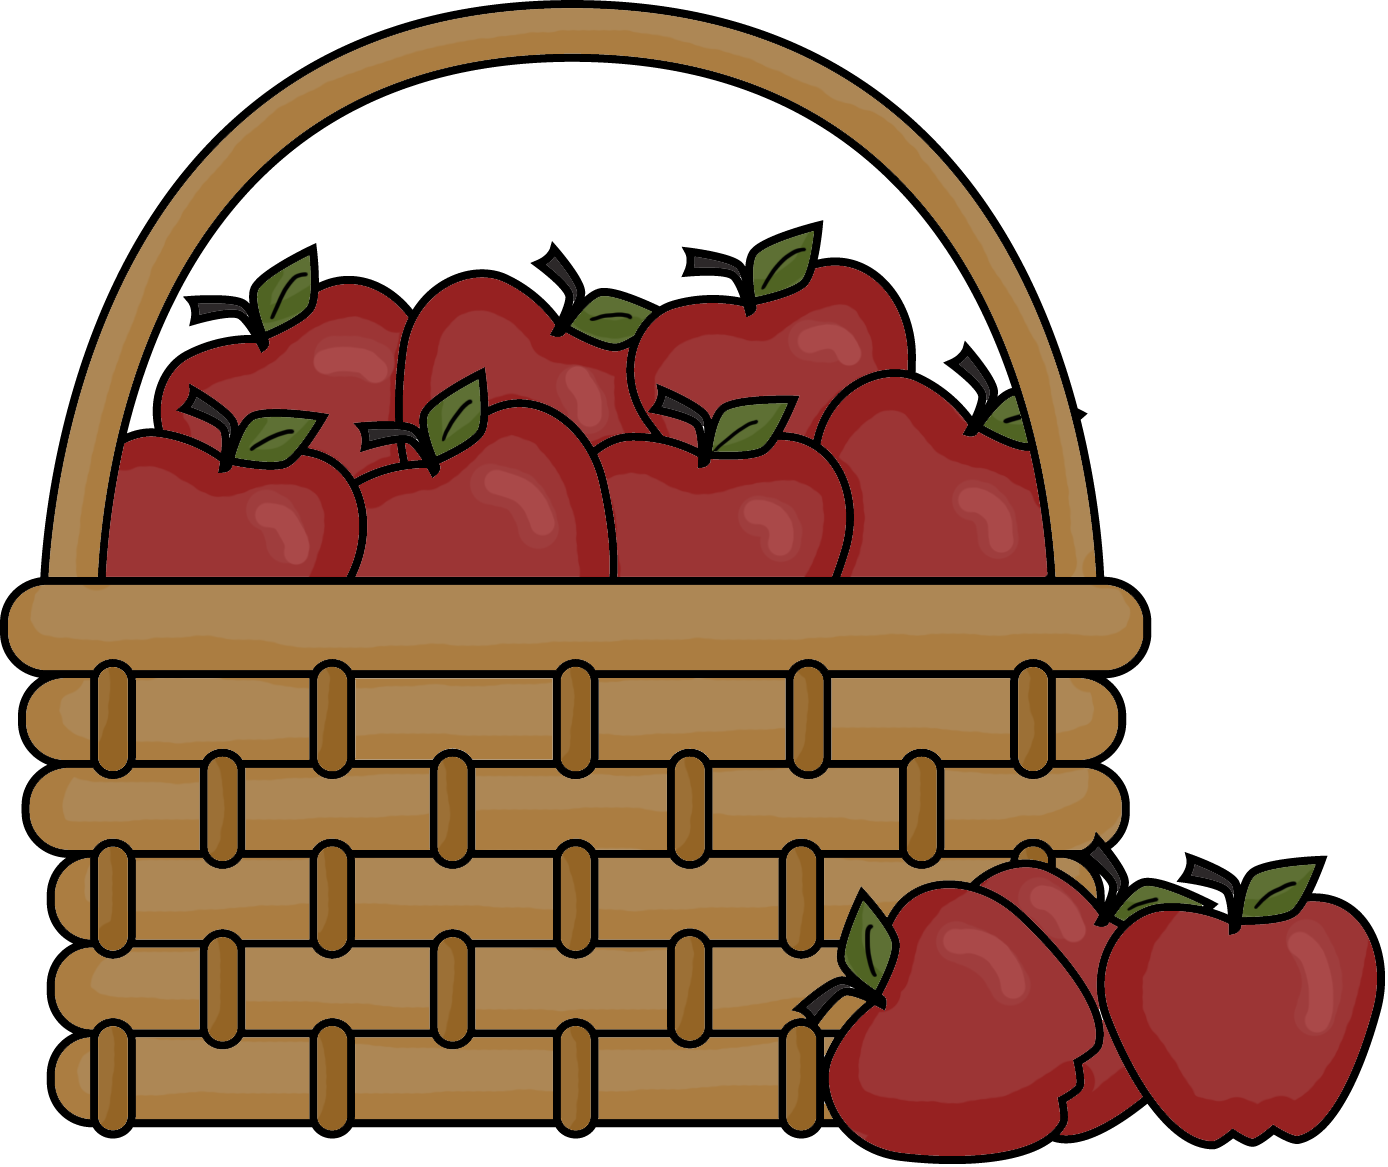 Free Carrying Fruit Cliparts, Download Free Carrying Fruit Cliparts png